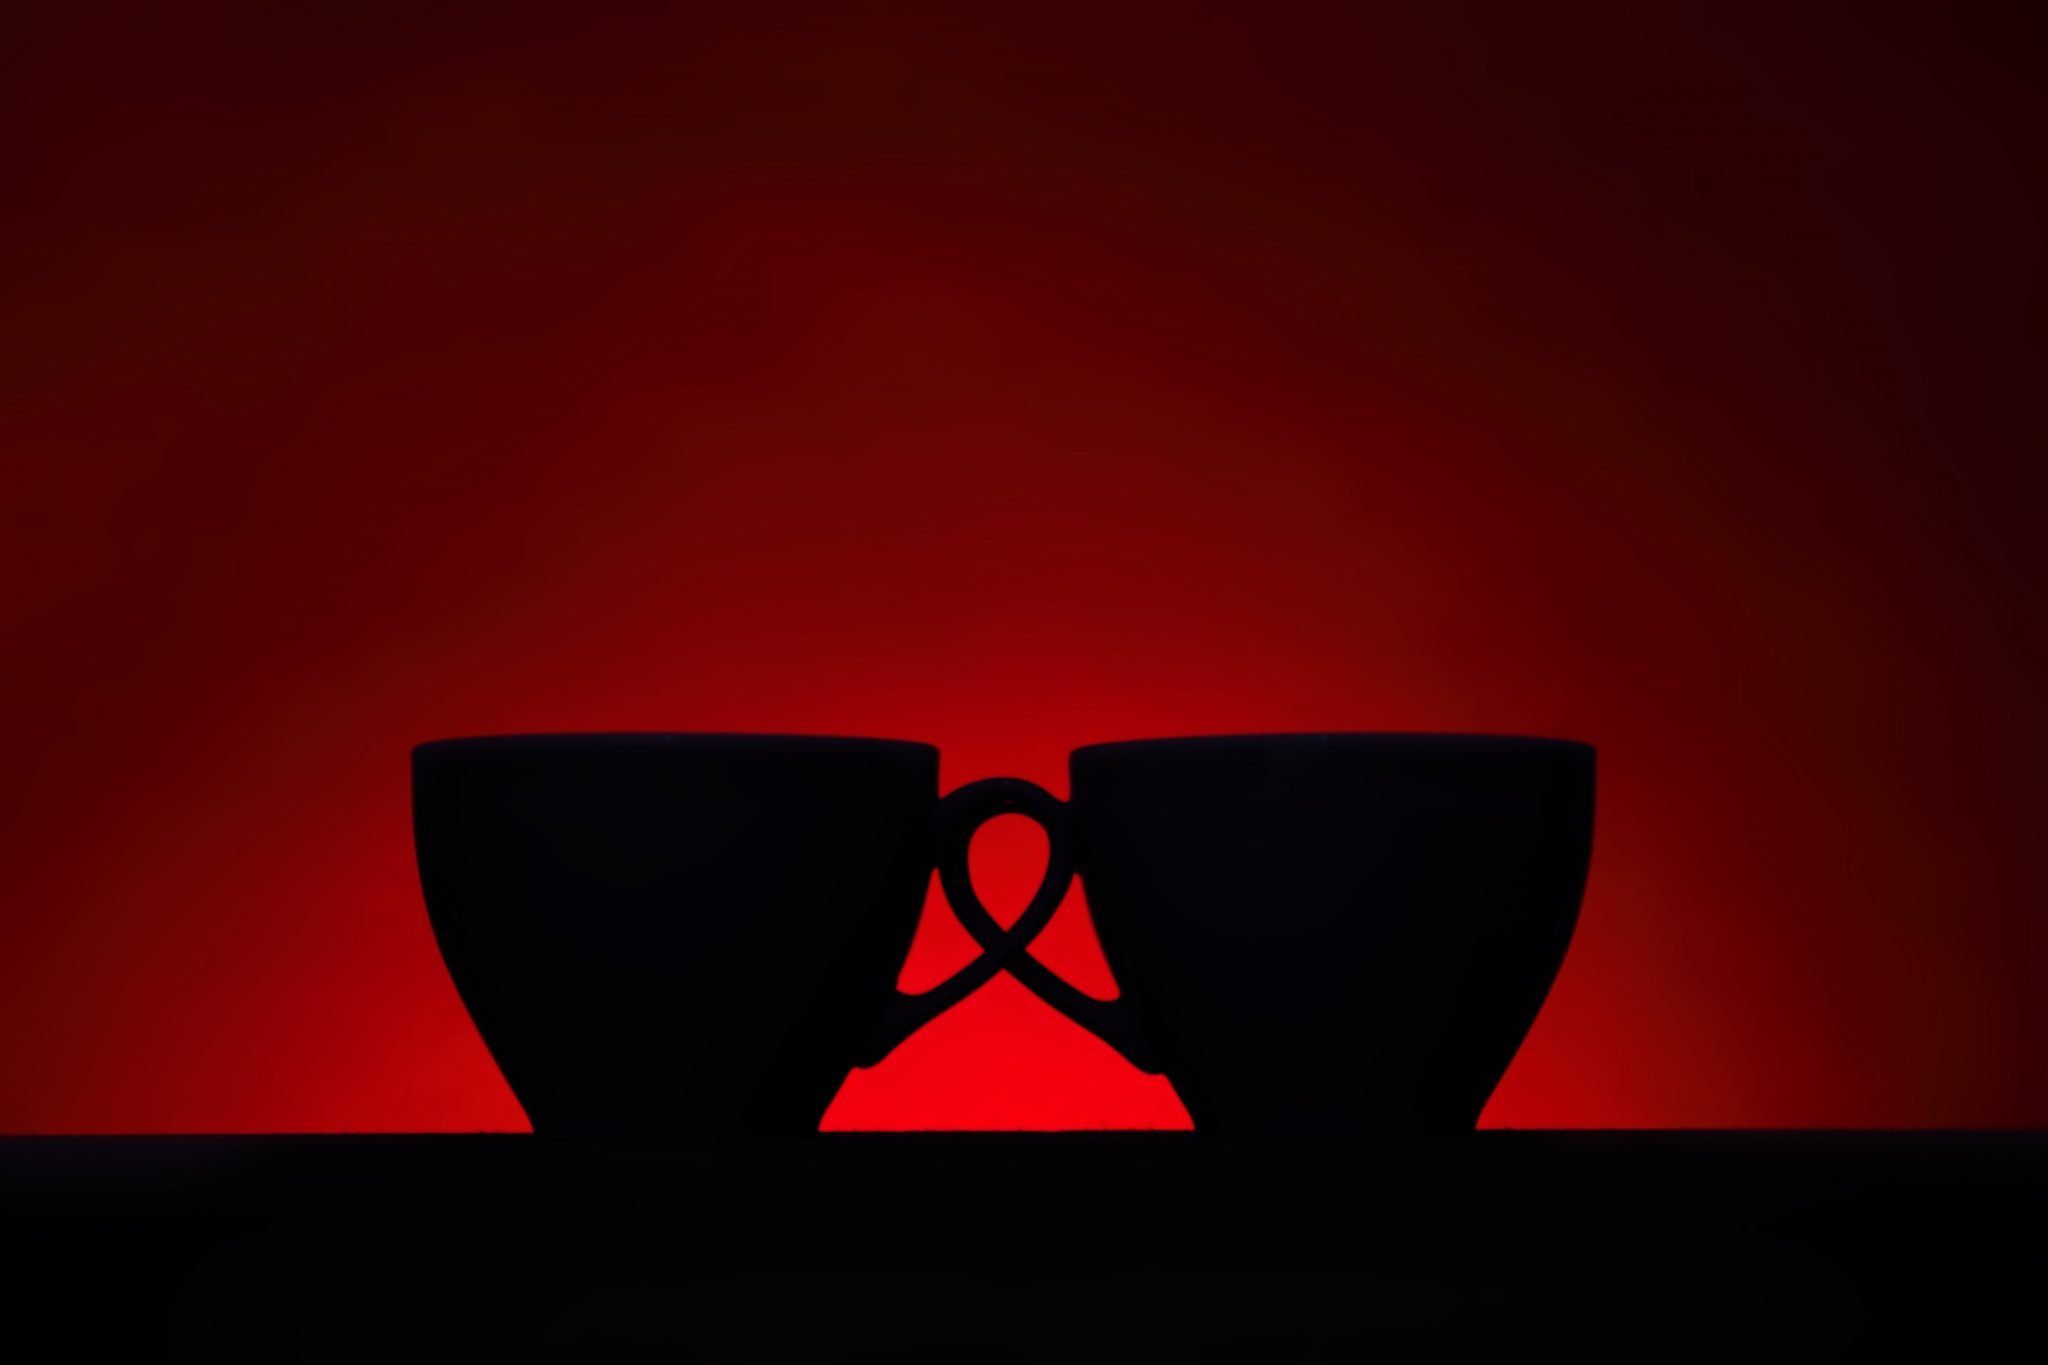 Silhouettes of two coffee cups on red background